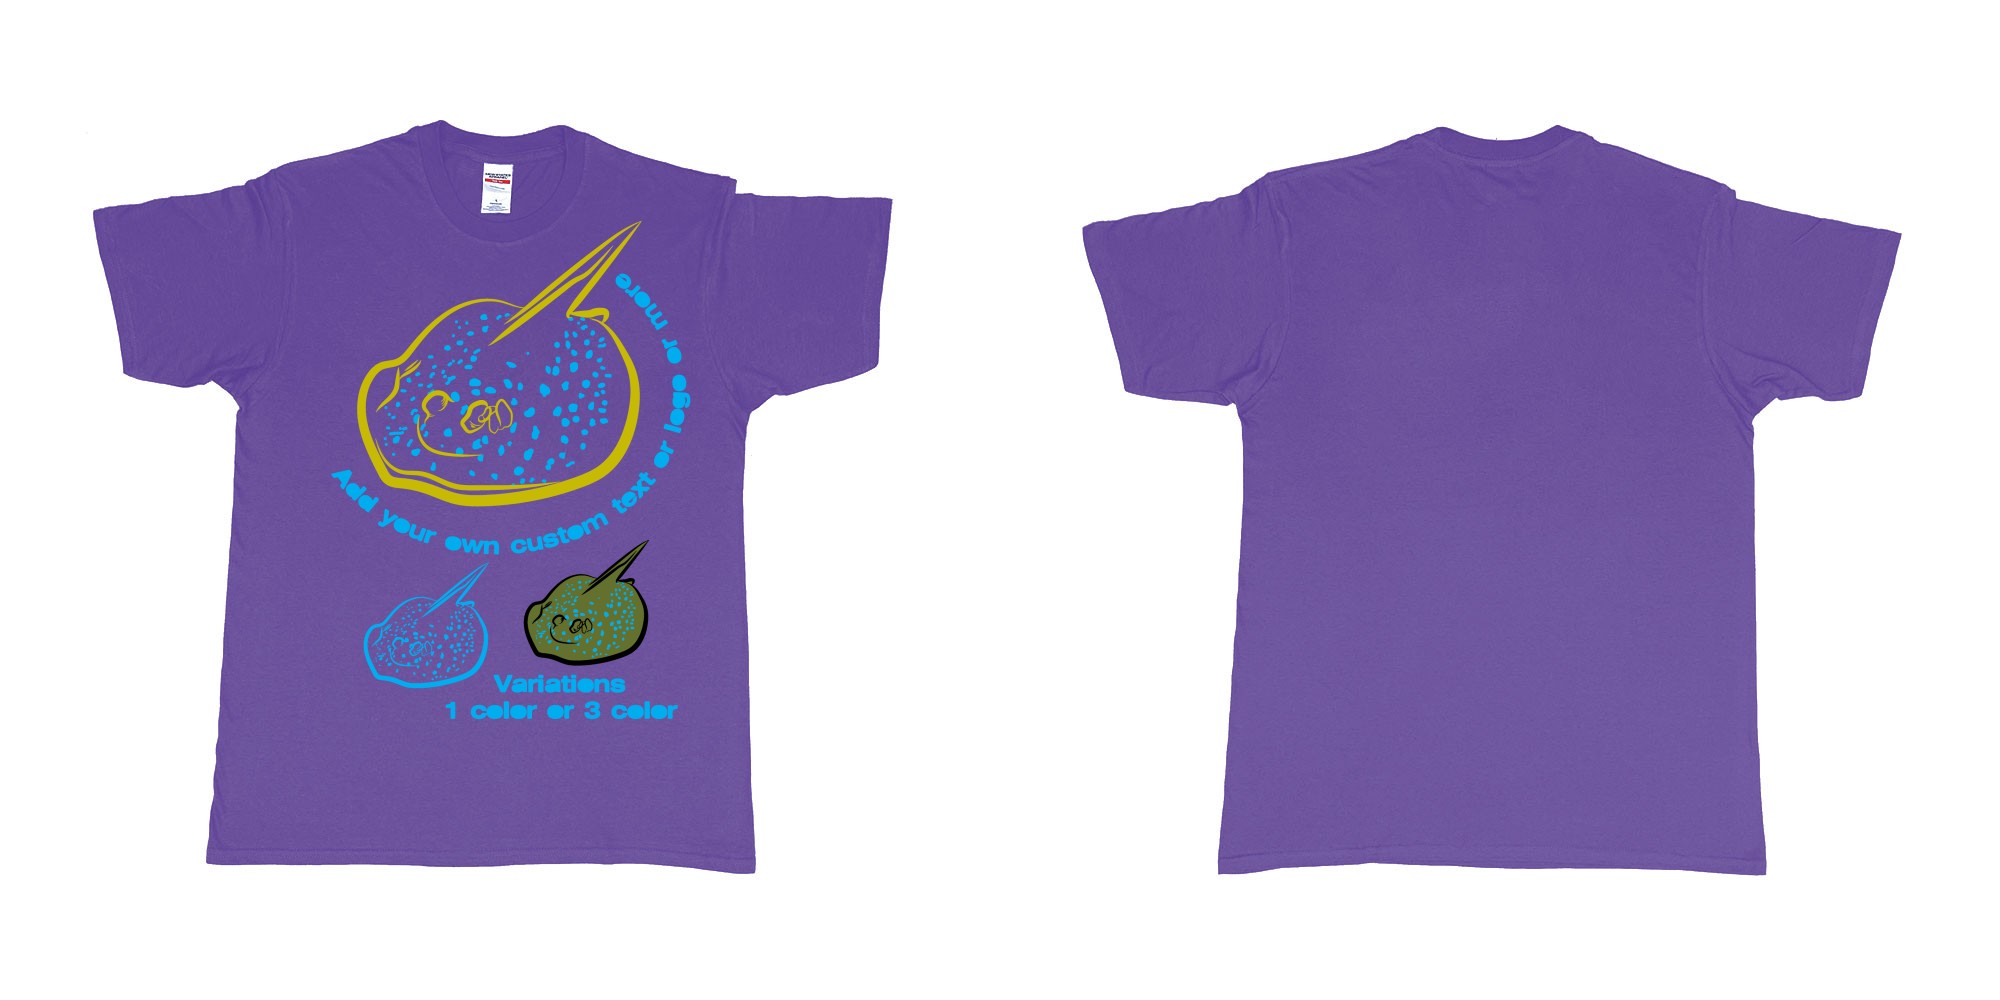 Custom tshirt design blue spotted stingray in fabric color purple choice your own text made in Bali by The Pirate Way